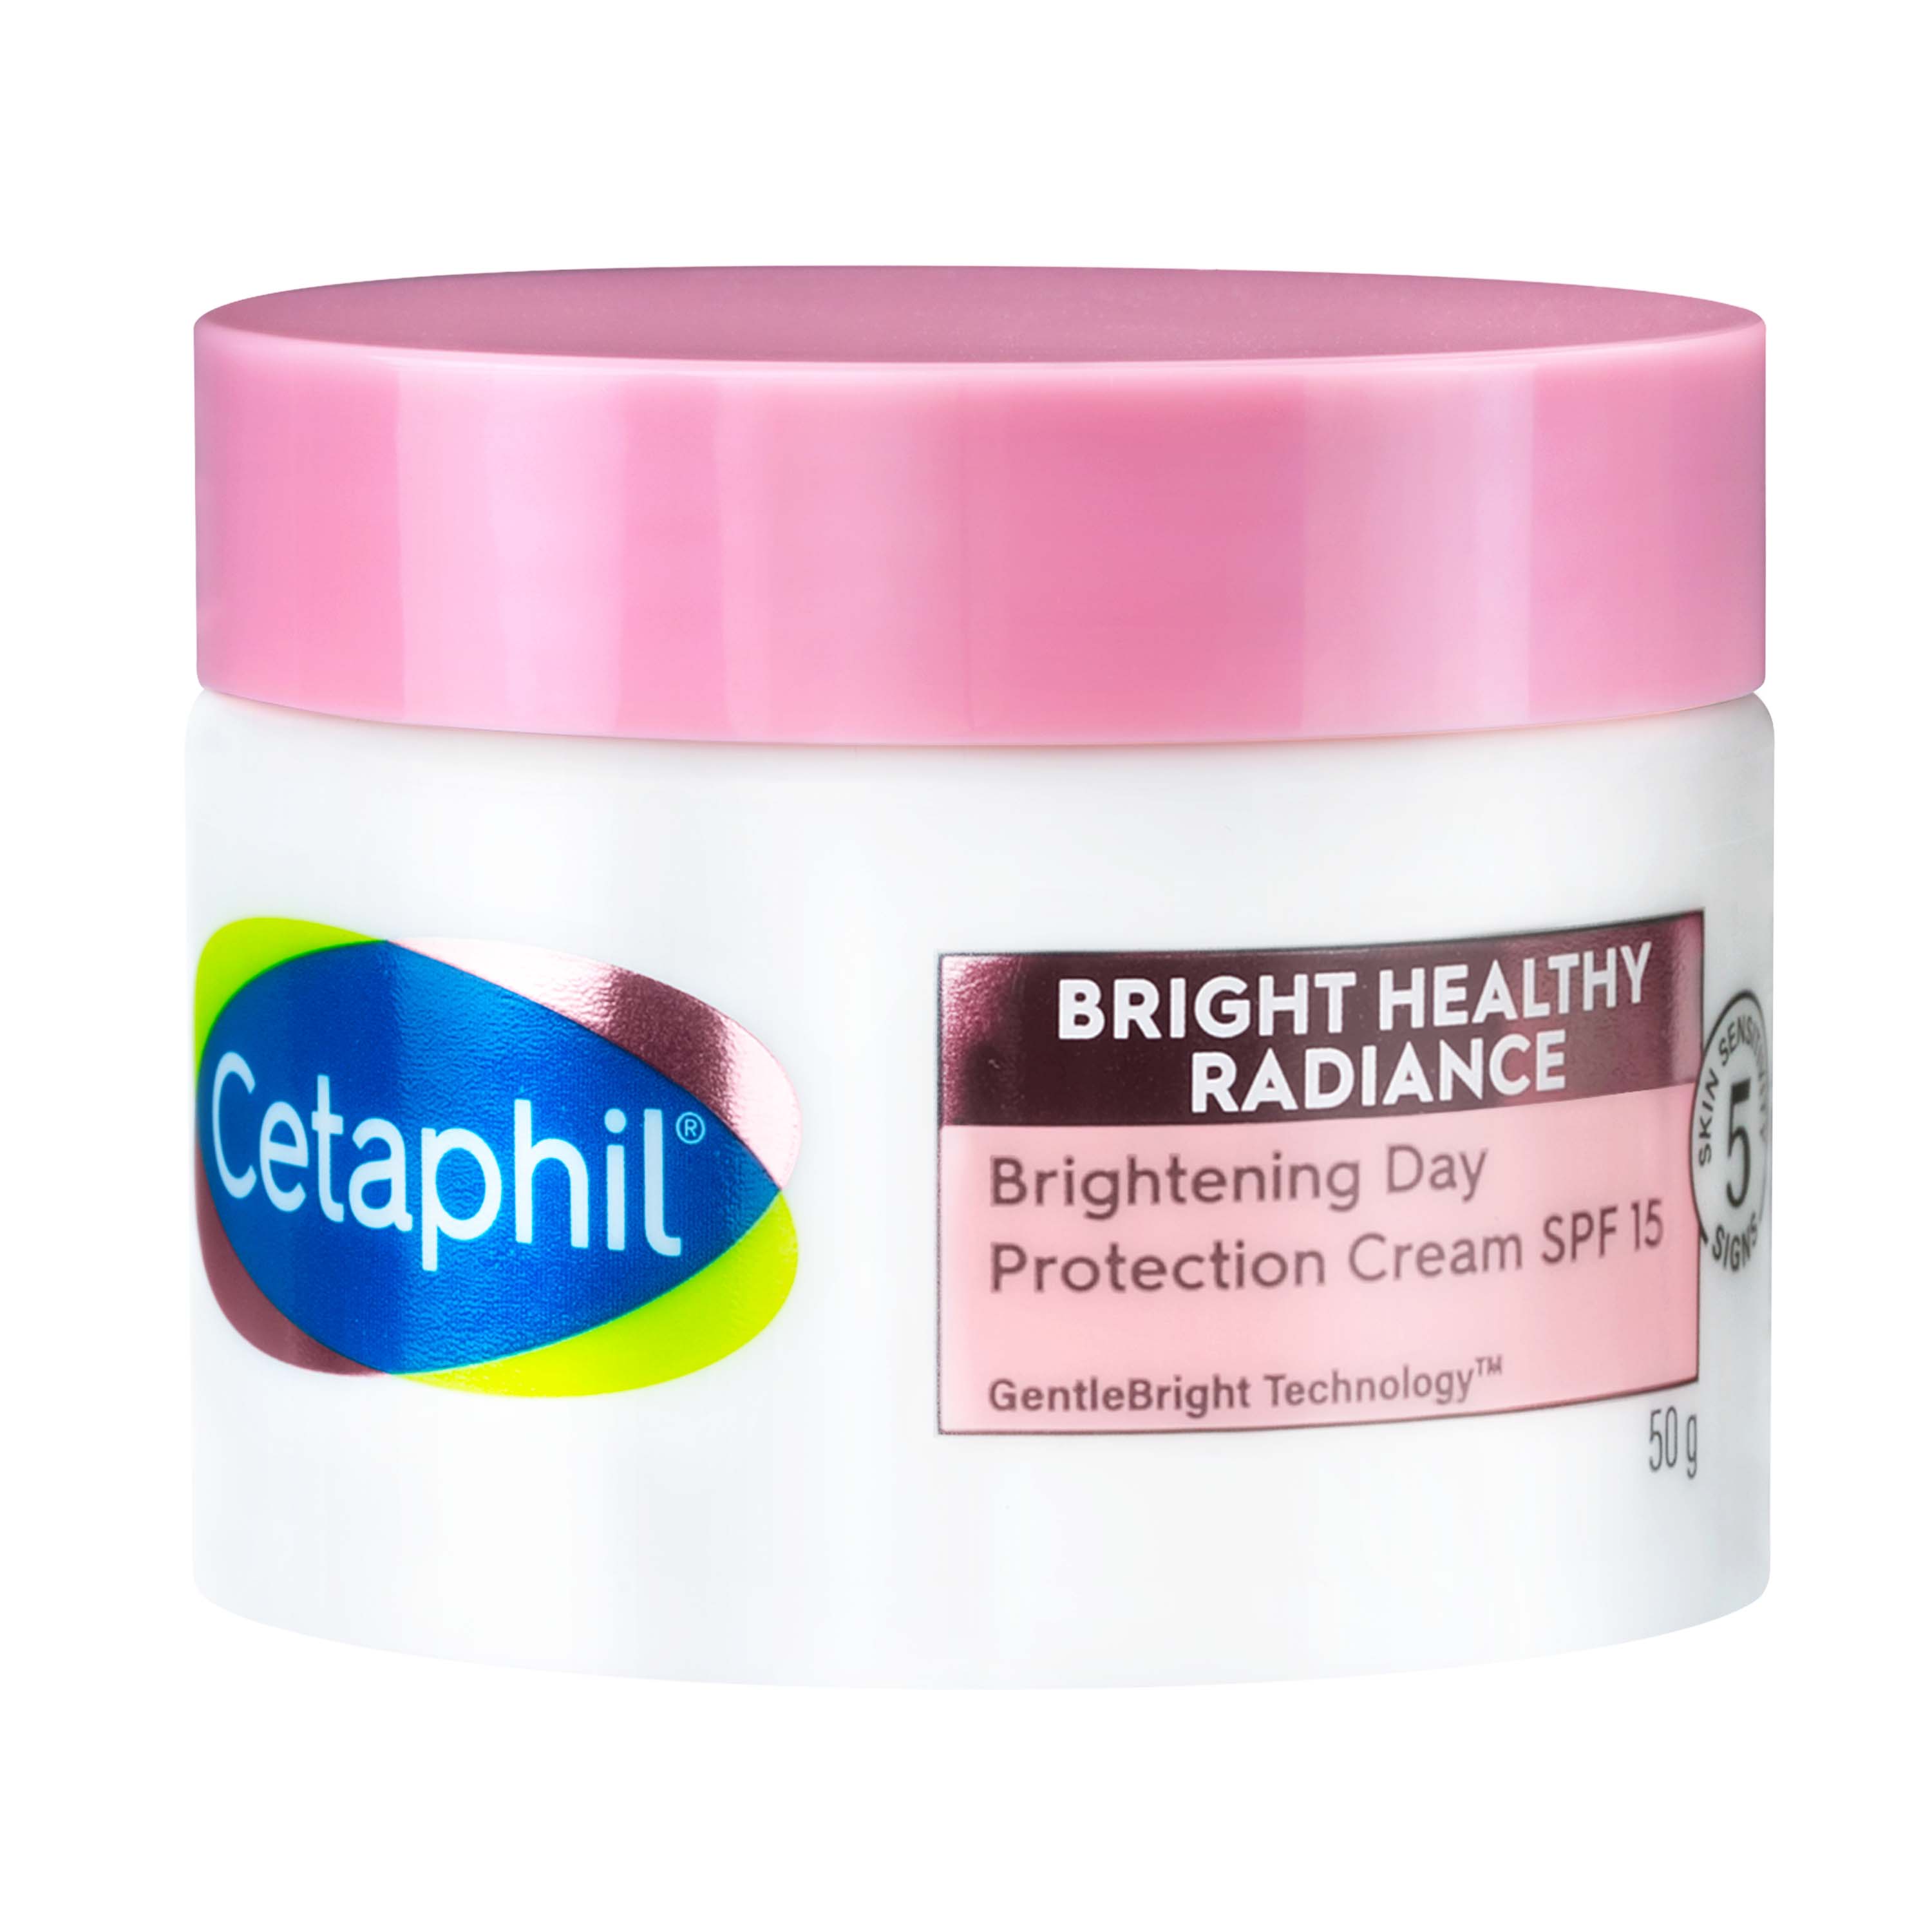 Bright Healthy Radiance Brightening Day Protection Cream SPF 15